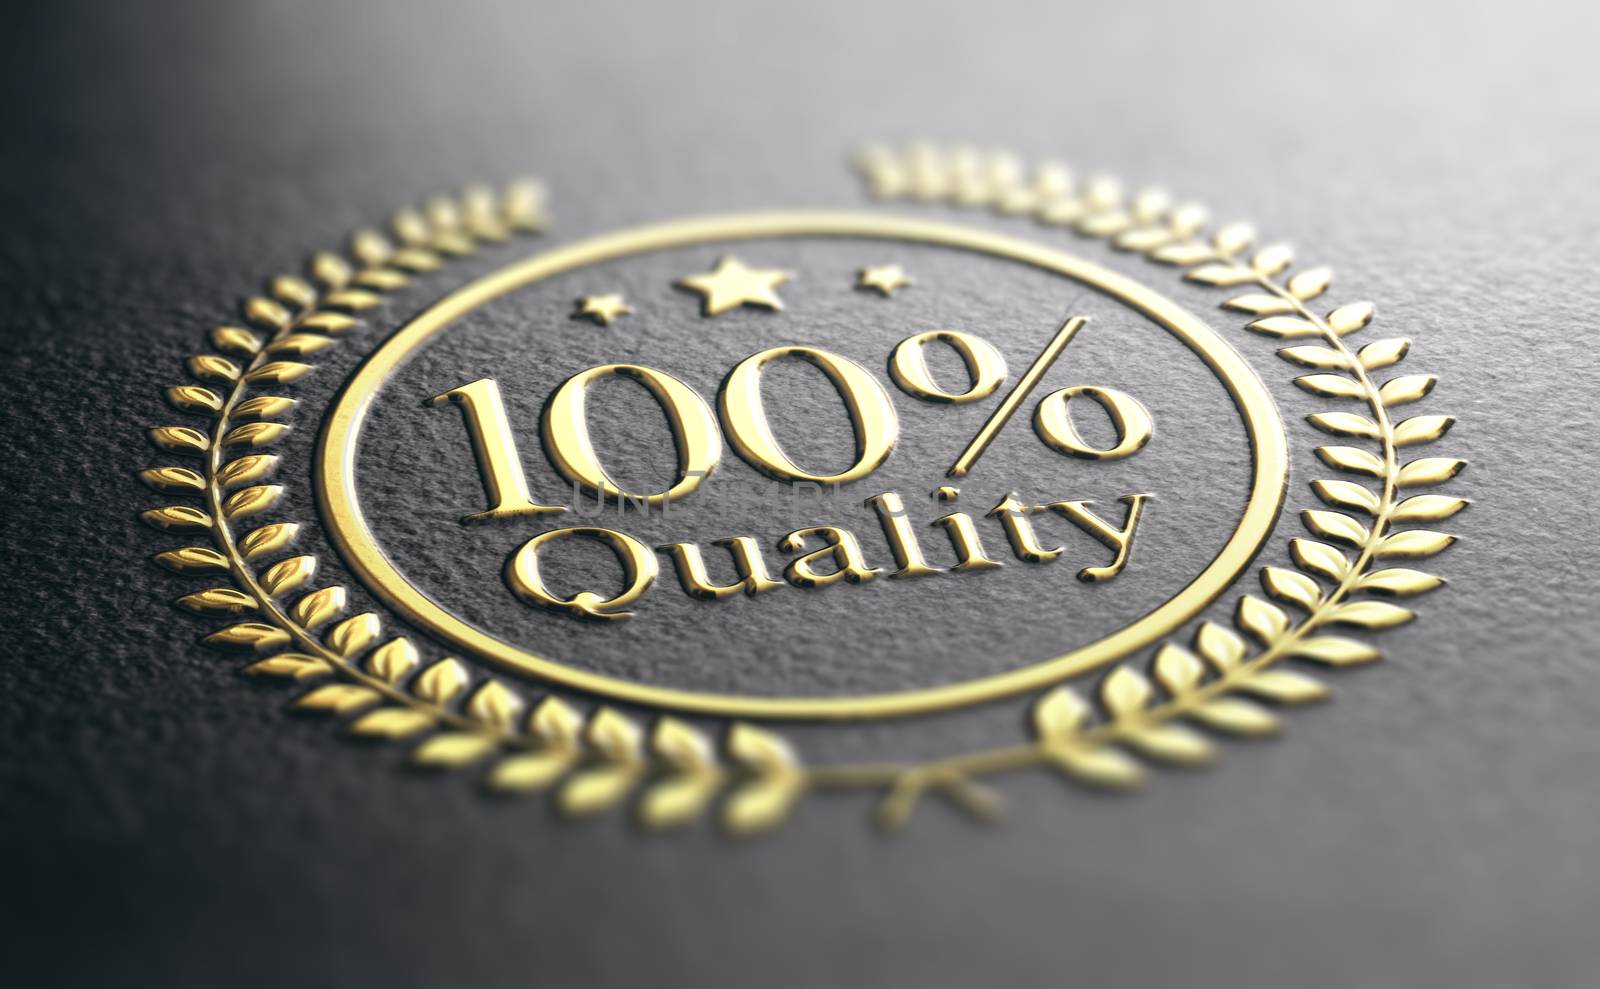 High Quality Guarantee Golden Stamp, Guaranteed Satisfaction Con by Olivier-Le-Moal